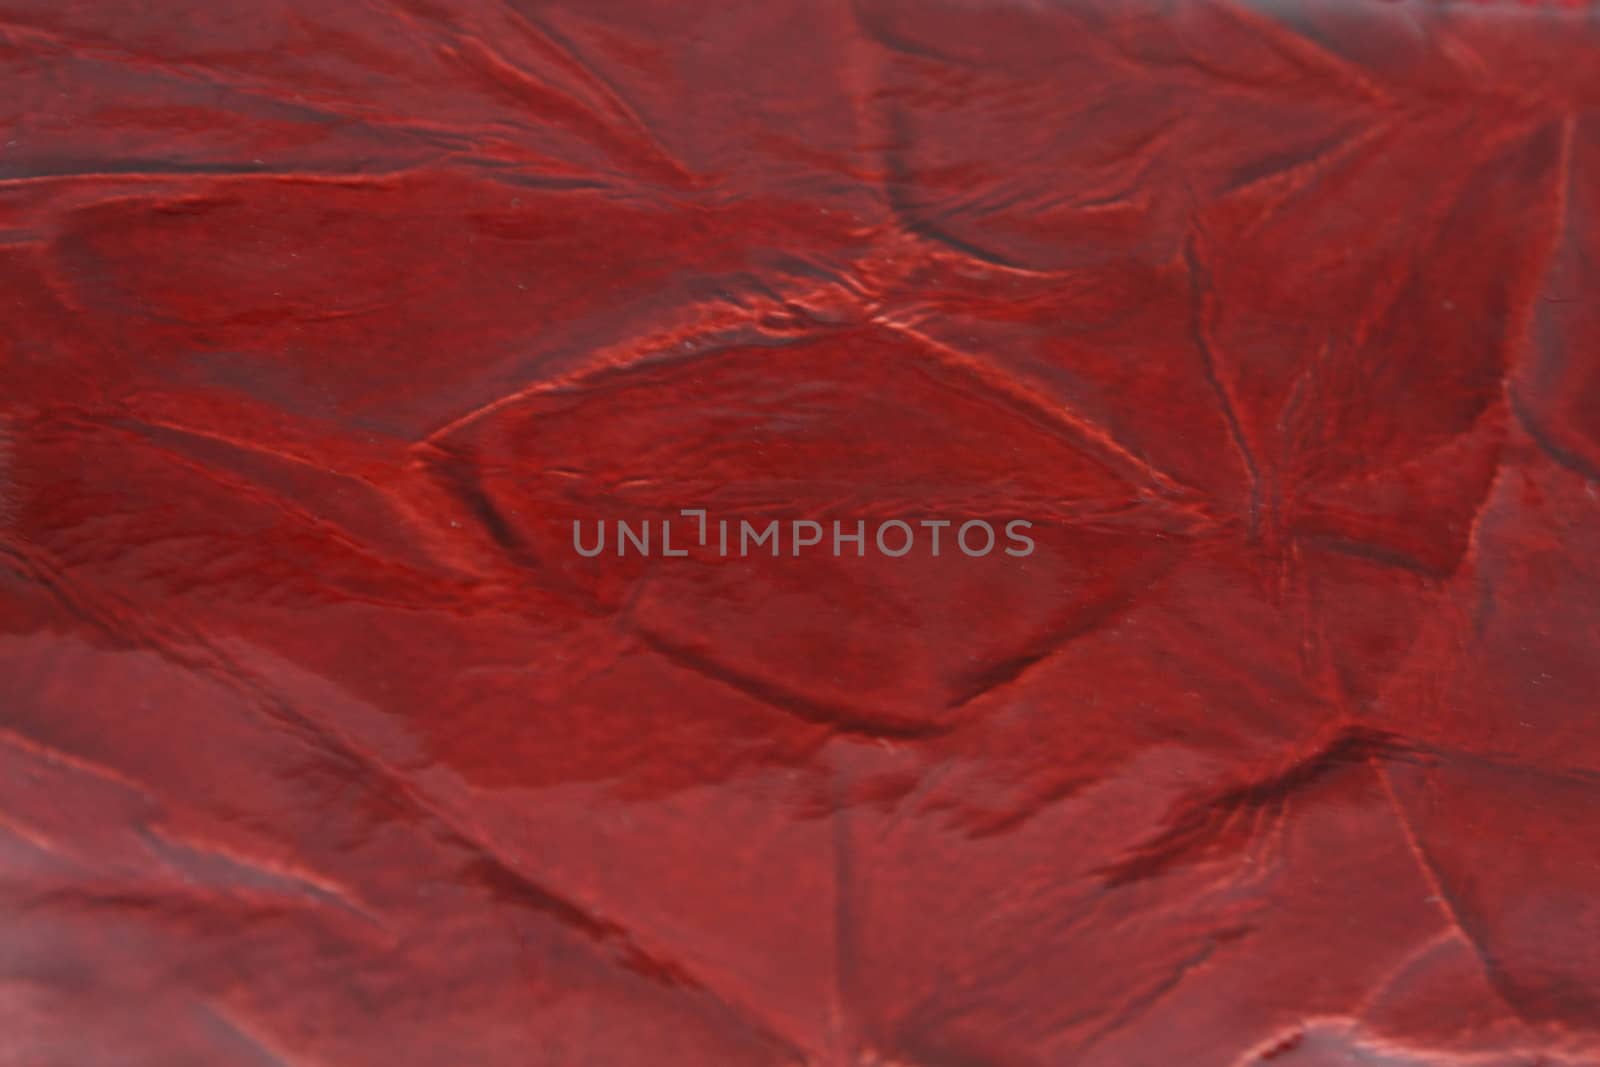 Close up of the texture of red leather